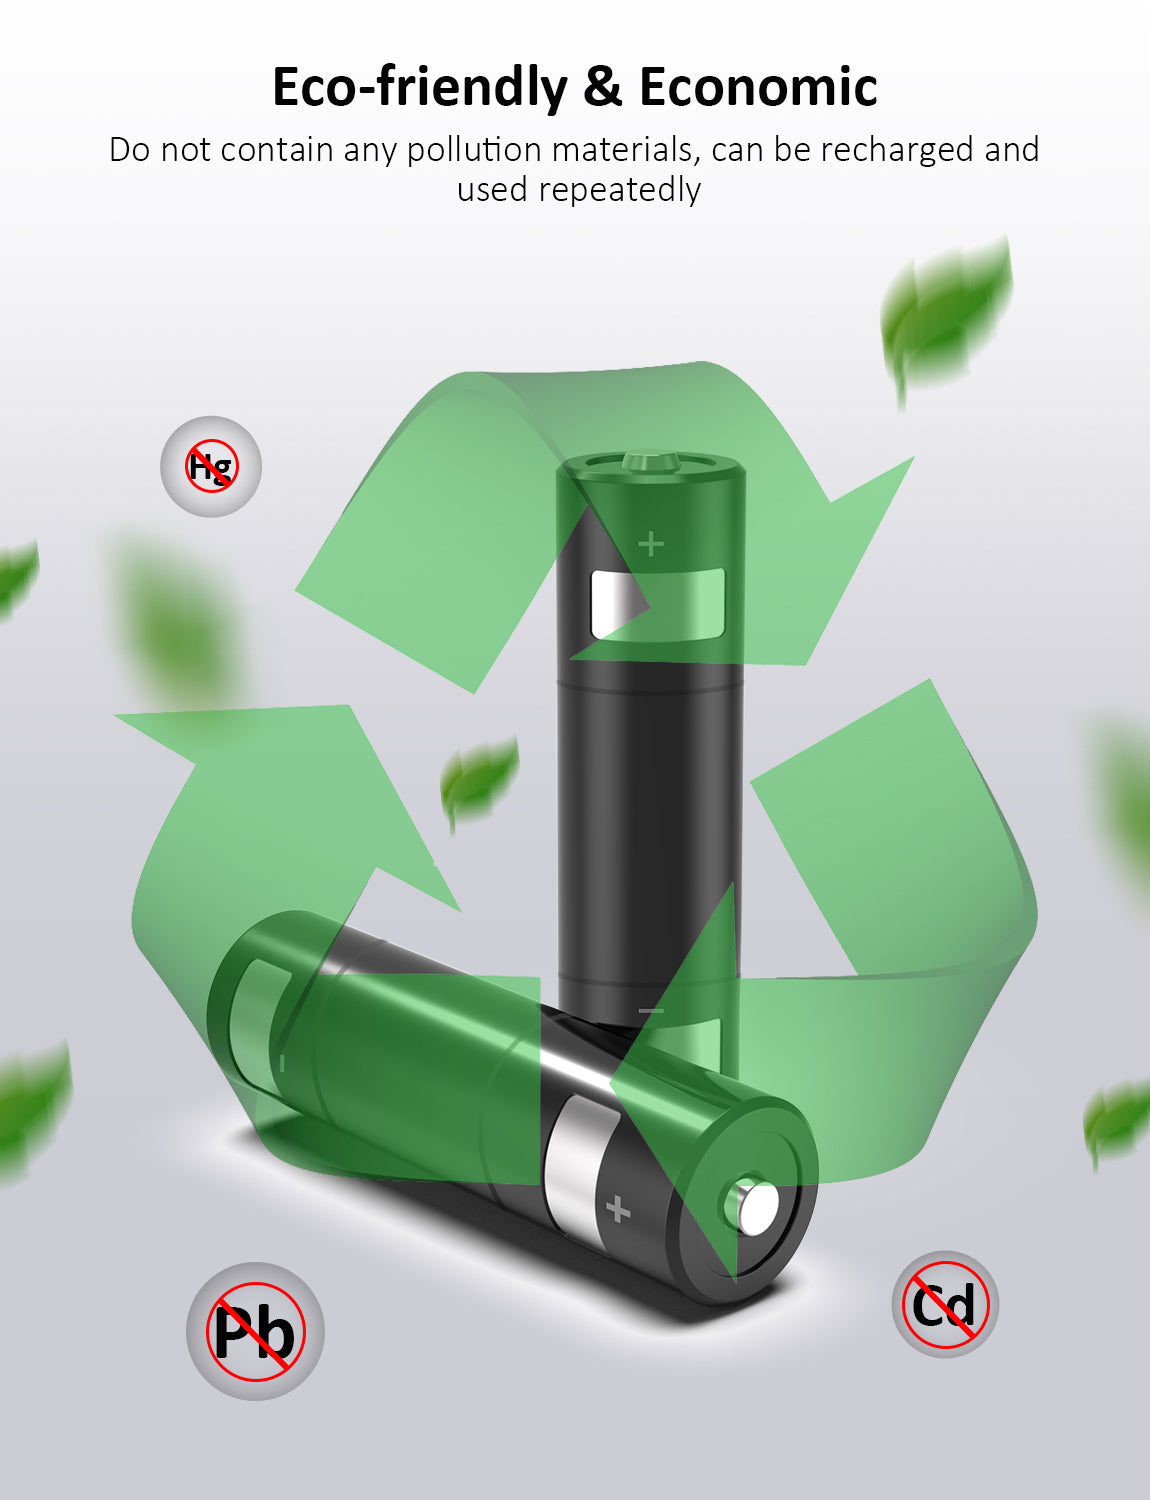 This battery is both eco-friendly and cost-effective. 